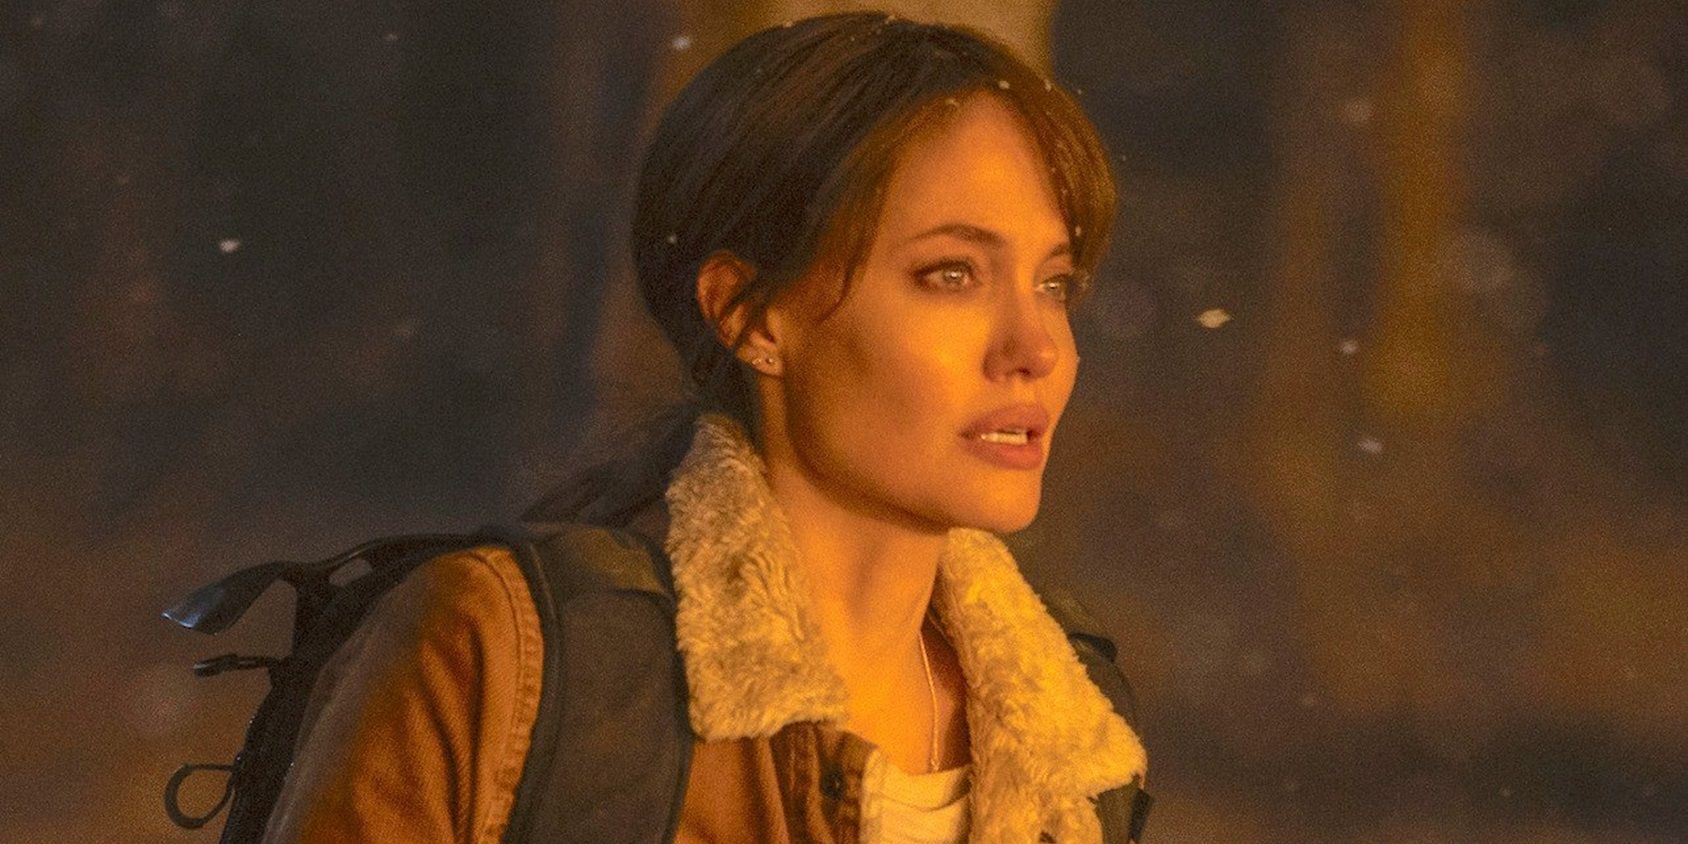 Angelina Jolie in a burning forest in Those Who Wish Me Dead